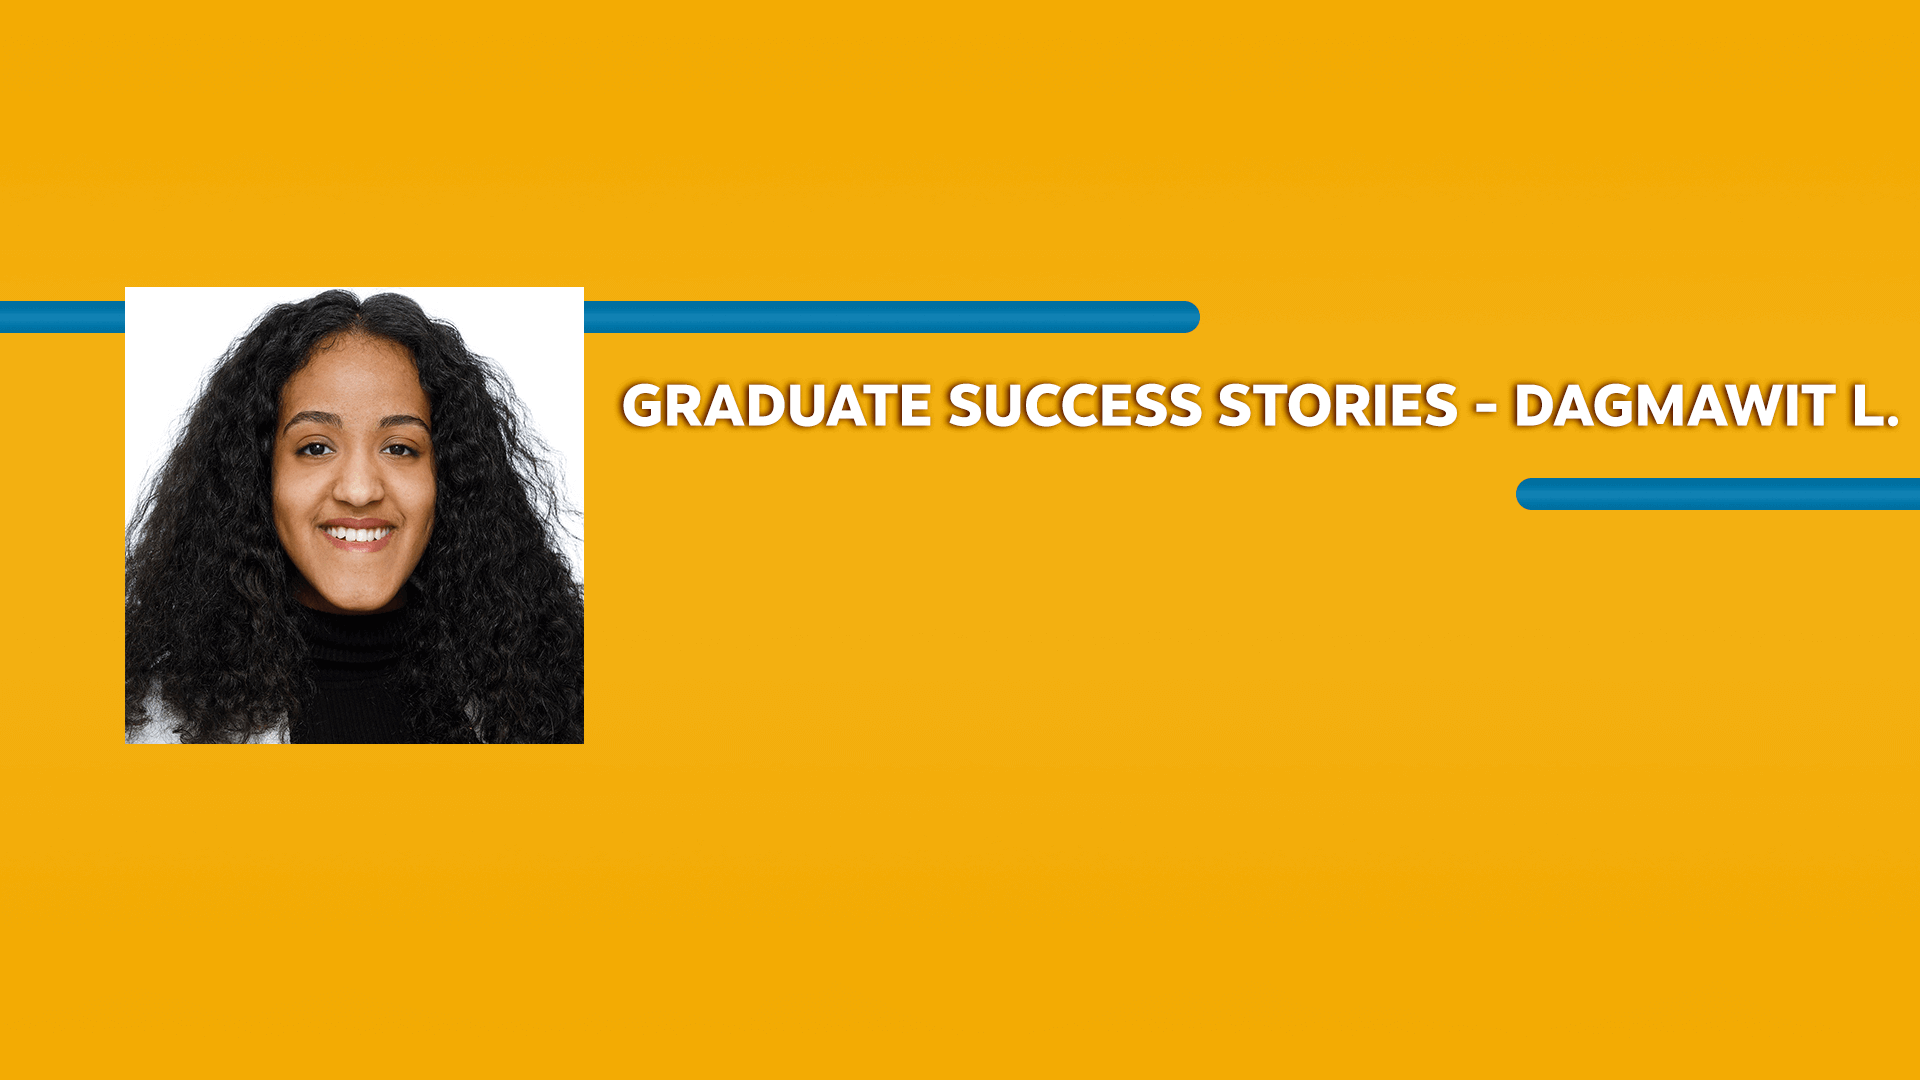 Orange rectangle with a picture of a woman and Graduate Success Stories - Dagmawit L. text in white font